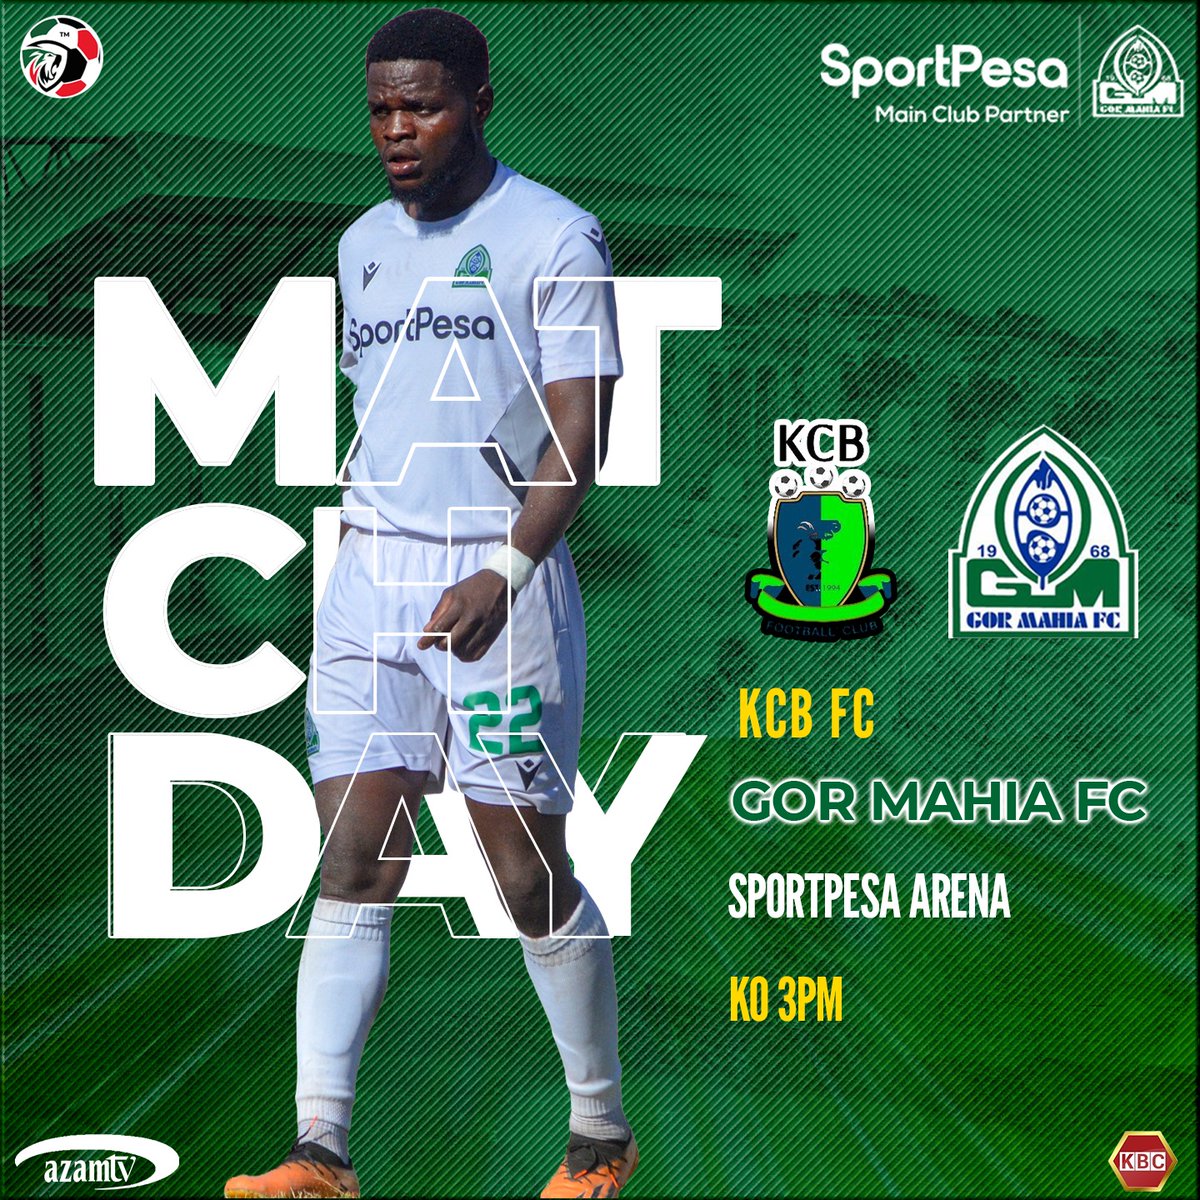 'They know what they want,to break the bank'....KCB vs Gor Mahia FC at 3PM from the Stadio Sportpesa Arena.This will thrill! #FKFPL